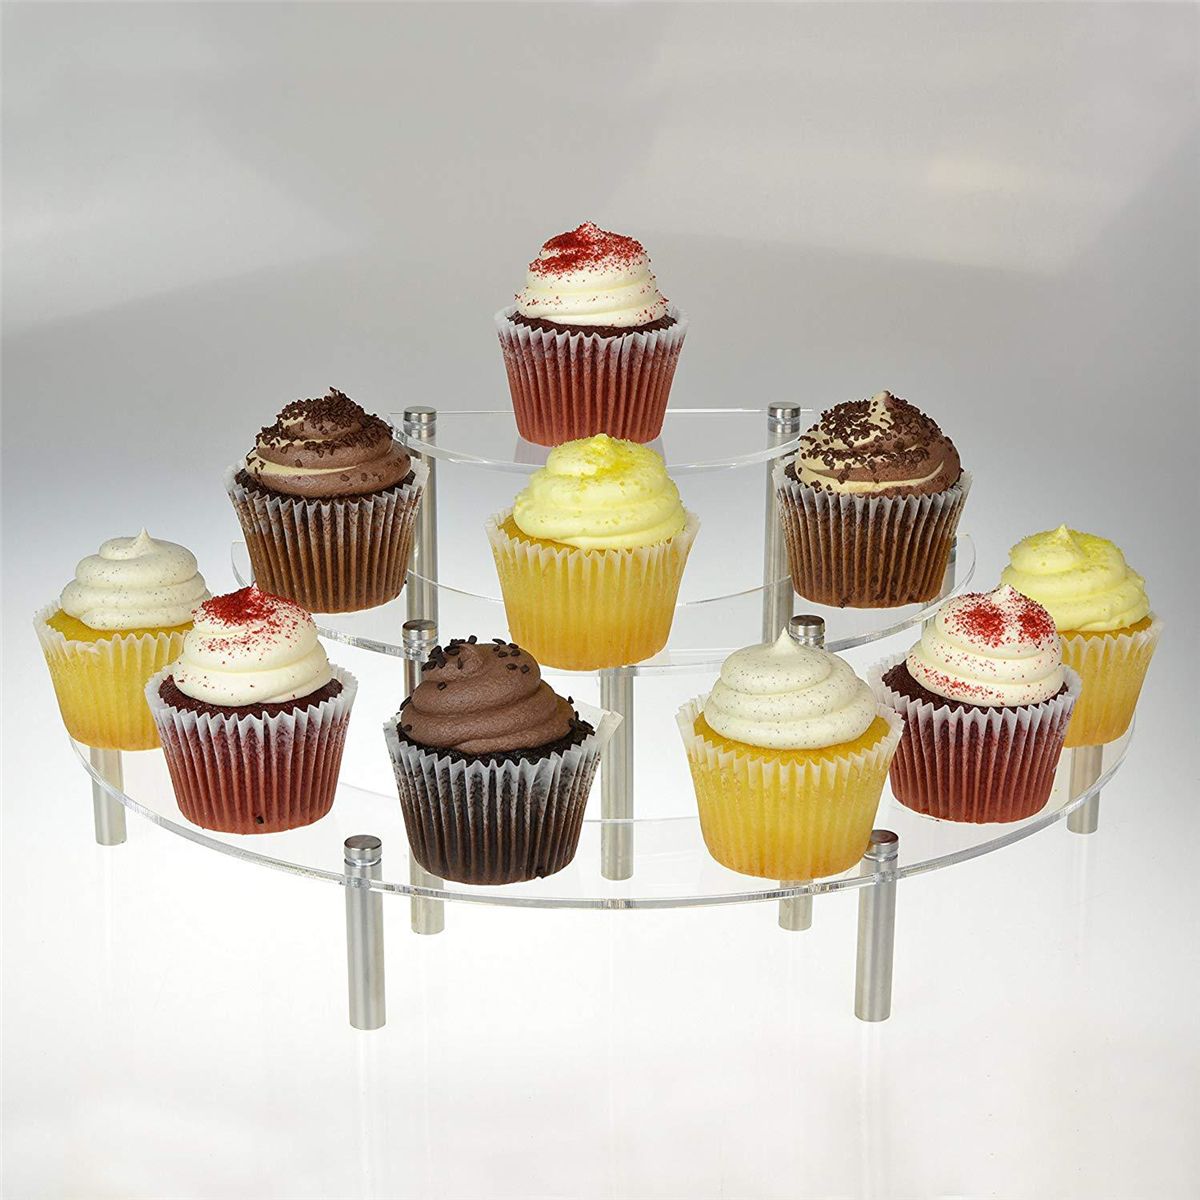 3-Tiers-Cupcakes-Stand-Acrylic-Display-Desserts-Stand-For-Home-Birthday-Wedding-Decorations-1570781